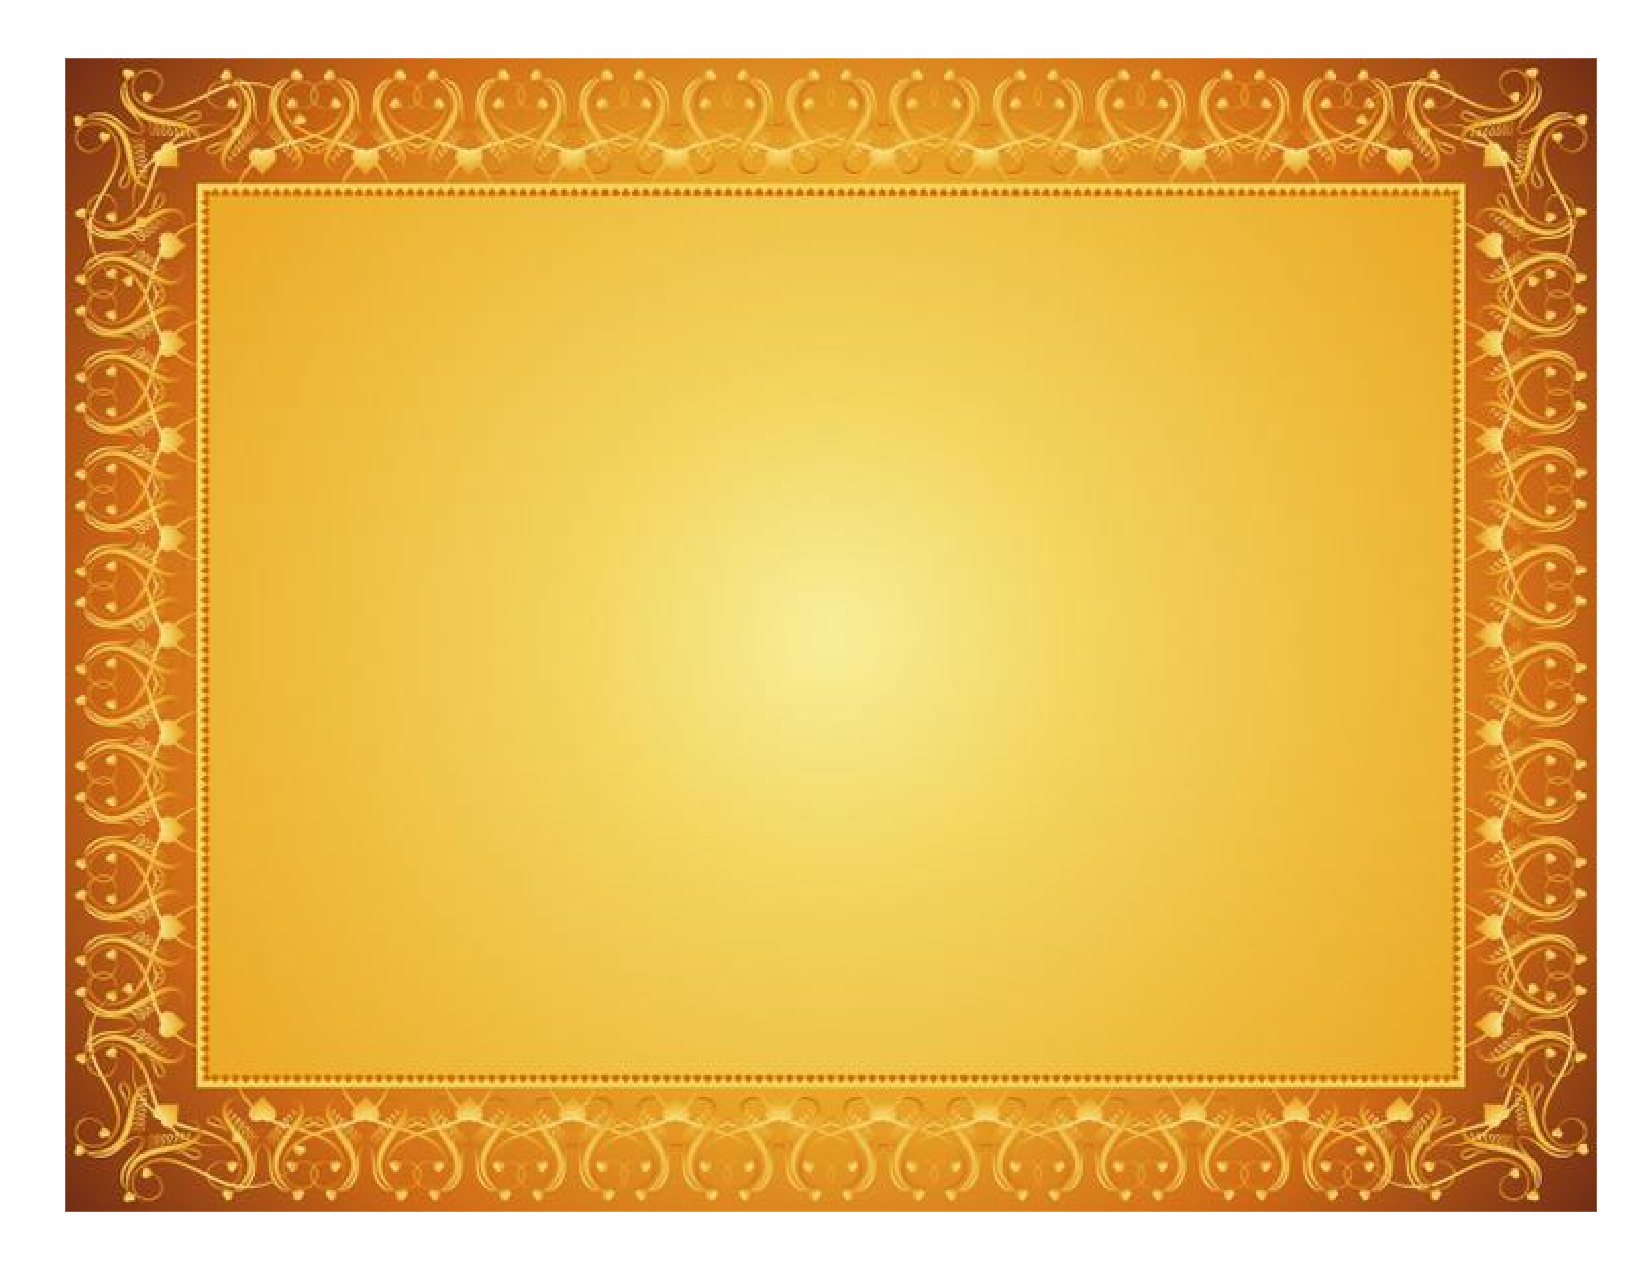 background-images-for-certificates-hd-clip-art-library